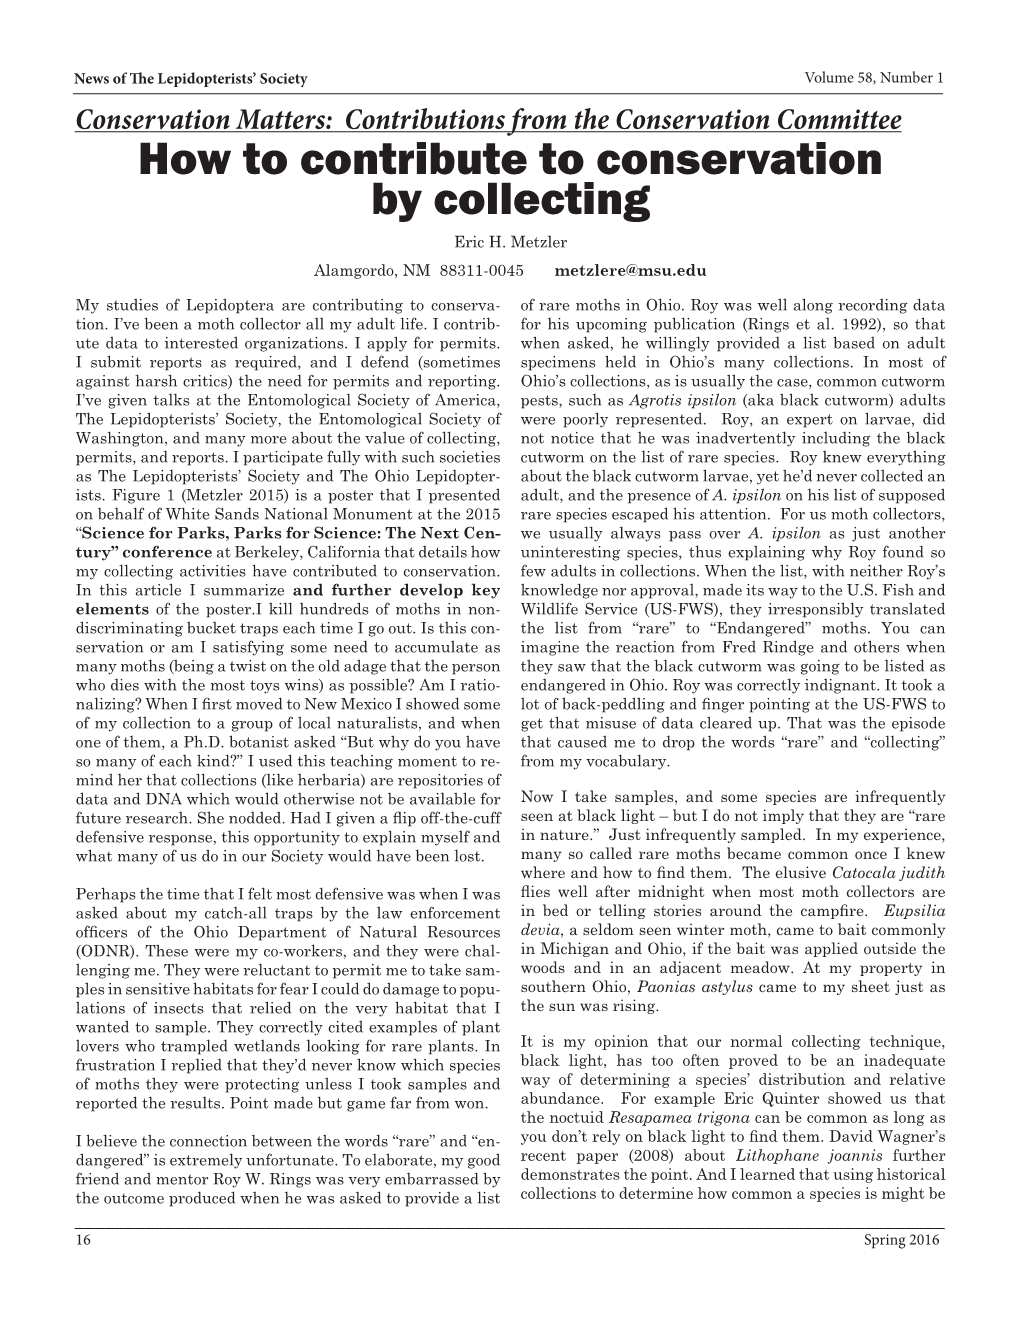 How to Contribute to Conservation by Collecting Eric H